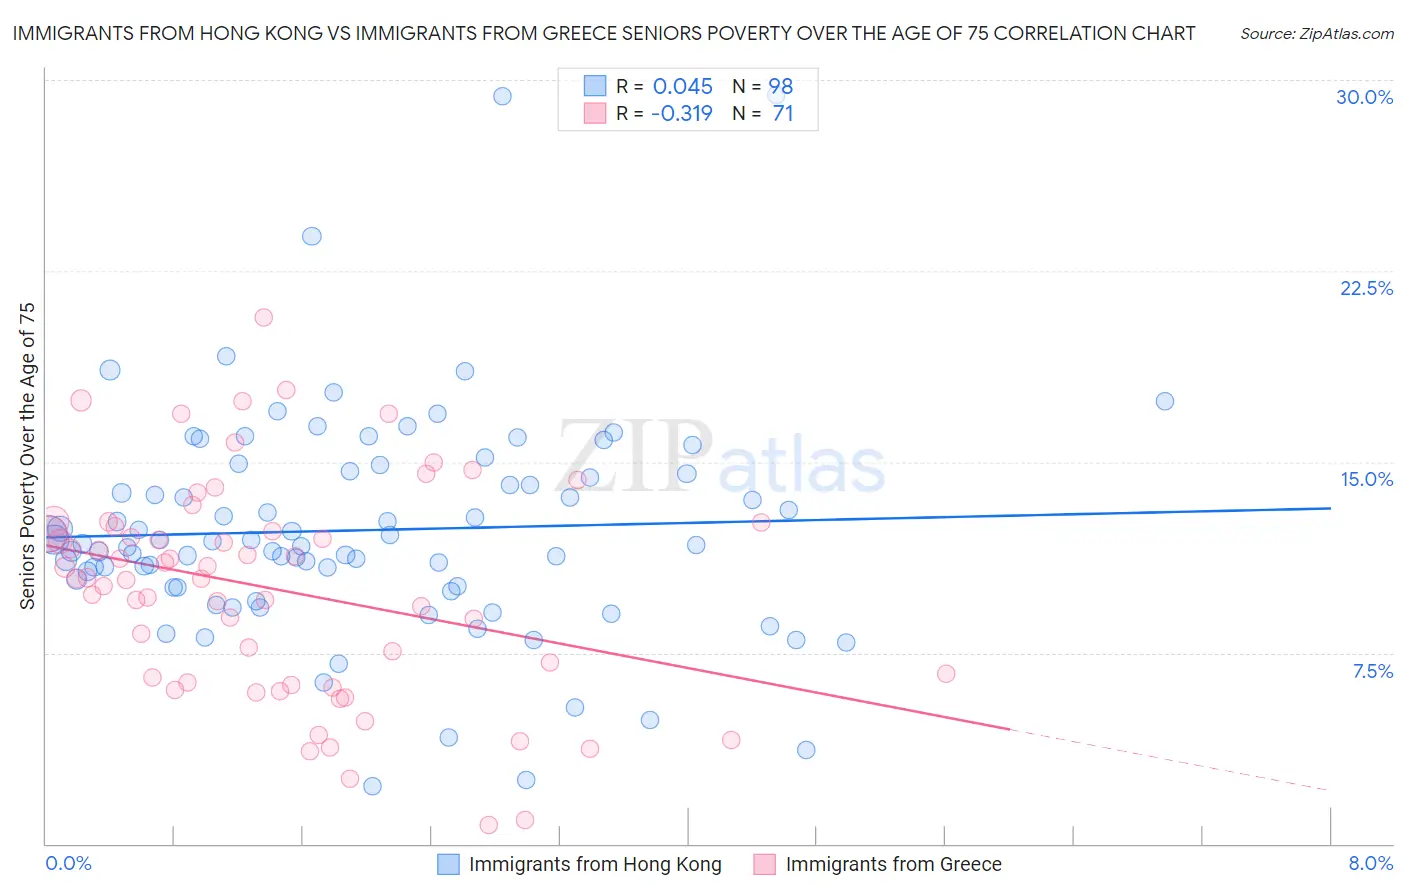 Immigrants from Hong Kong vs Immigrants from Greece Seniors Poverty Over the Age of 75